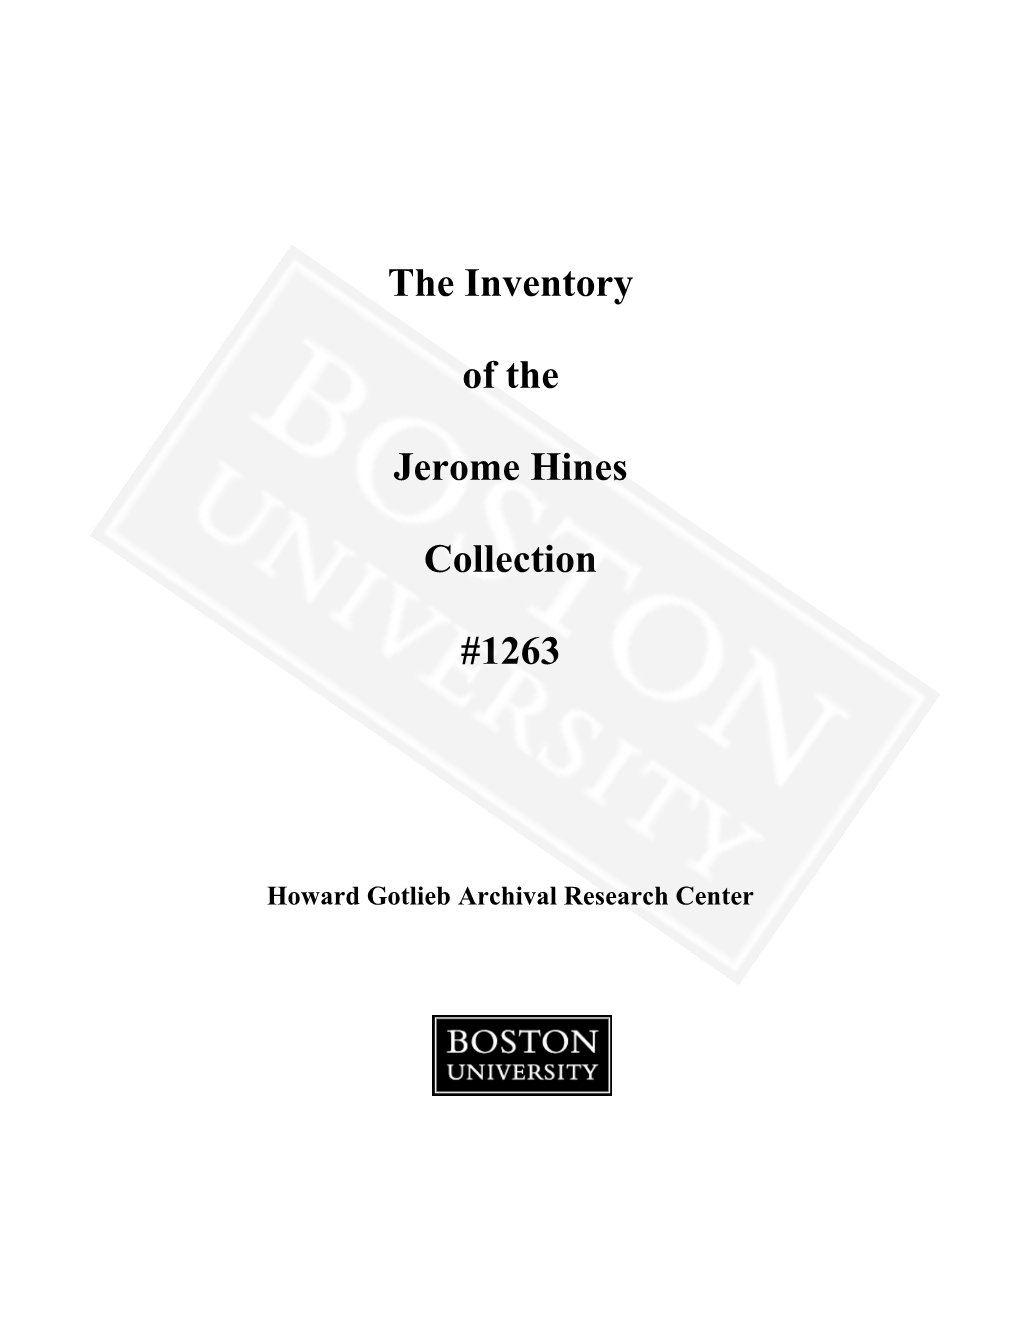 The Inventory of the Jerome Hines Collection #1263